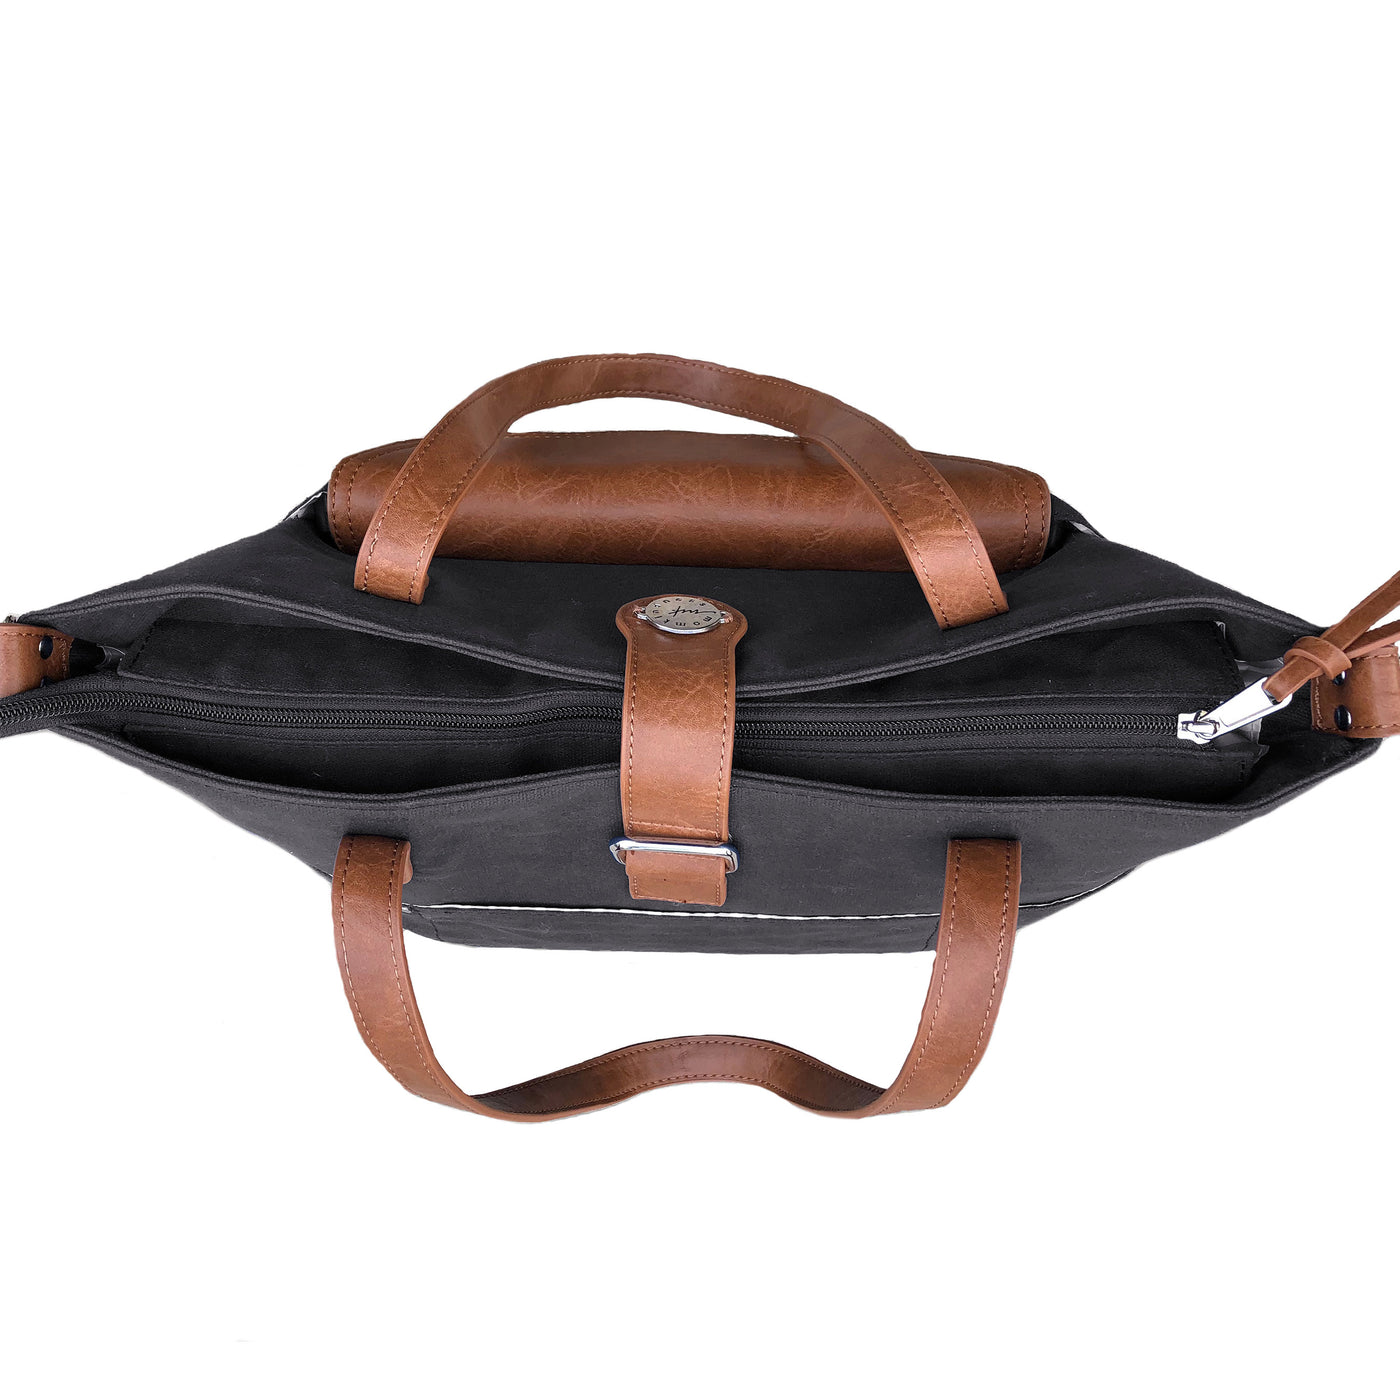 Top down view of black waxed canvas CarryAll Tote with caramel brown vegan leather accents, zipped on white background.